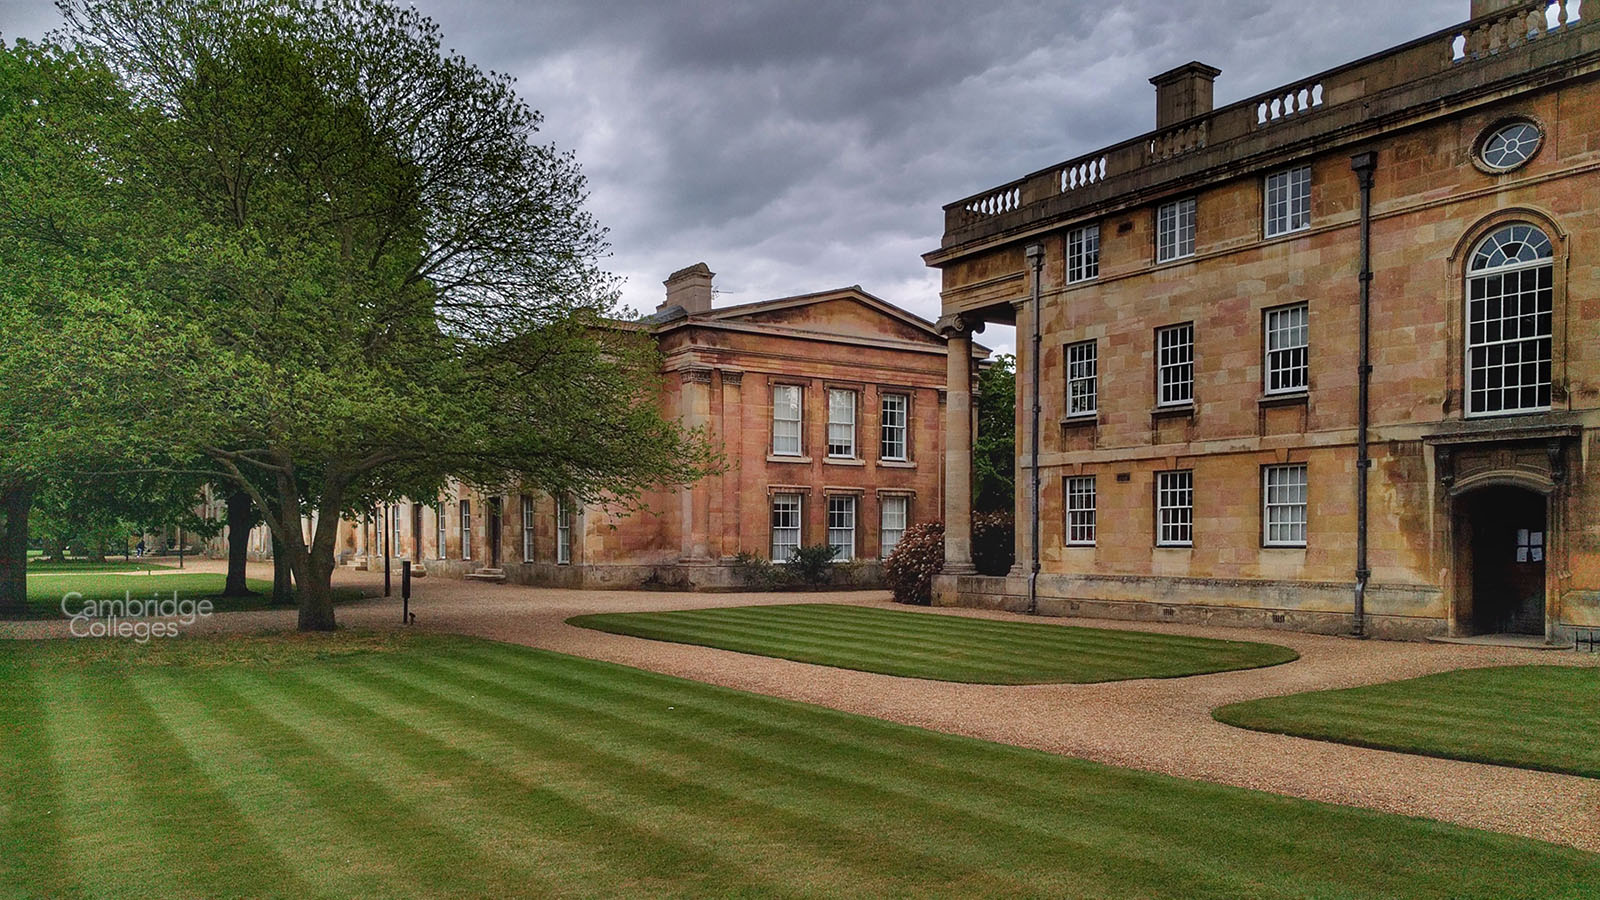 Downing college grounds